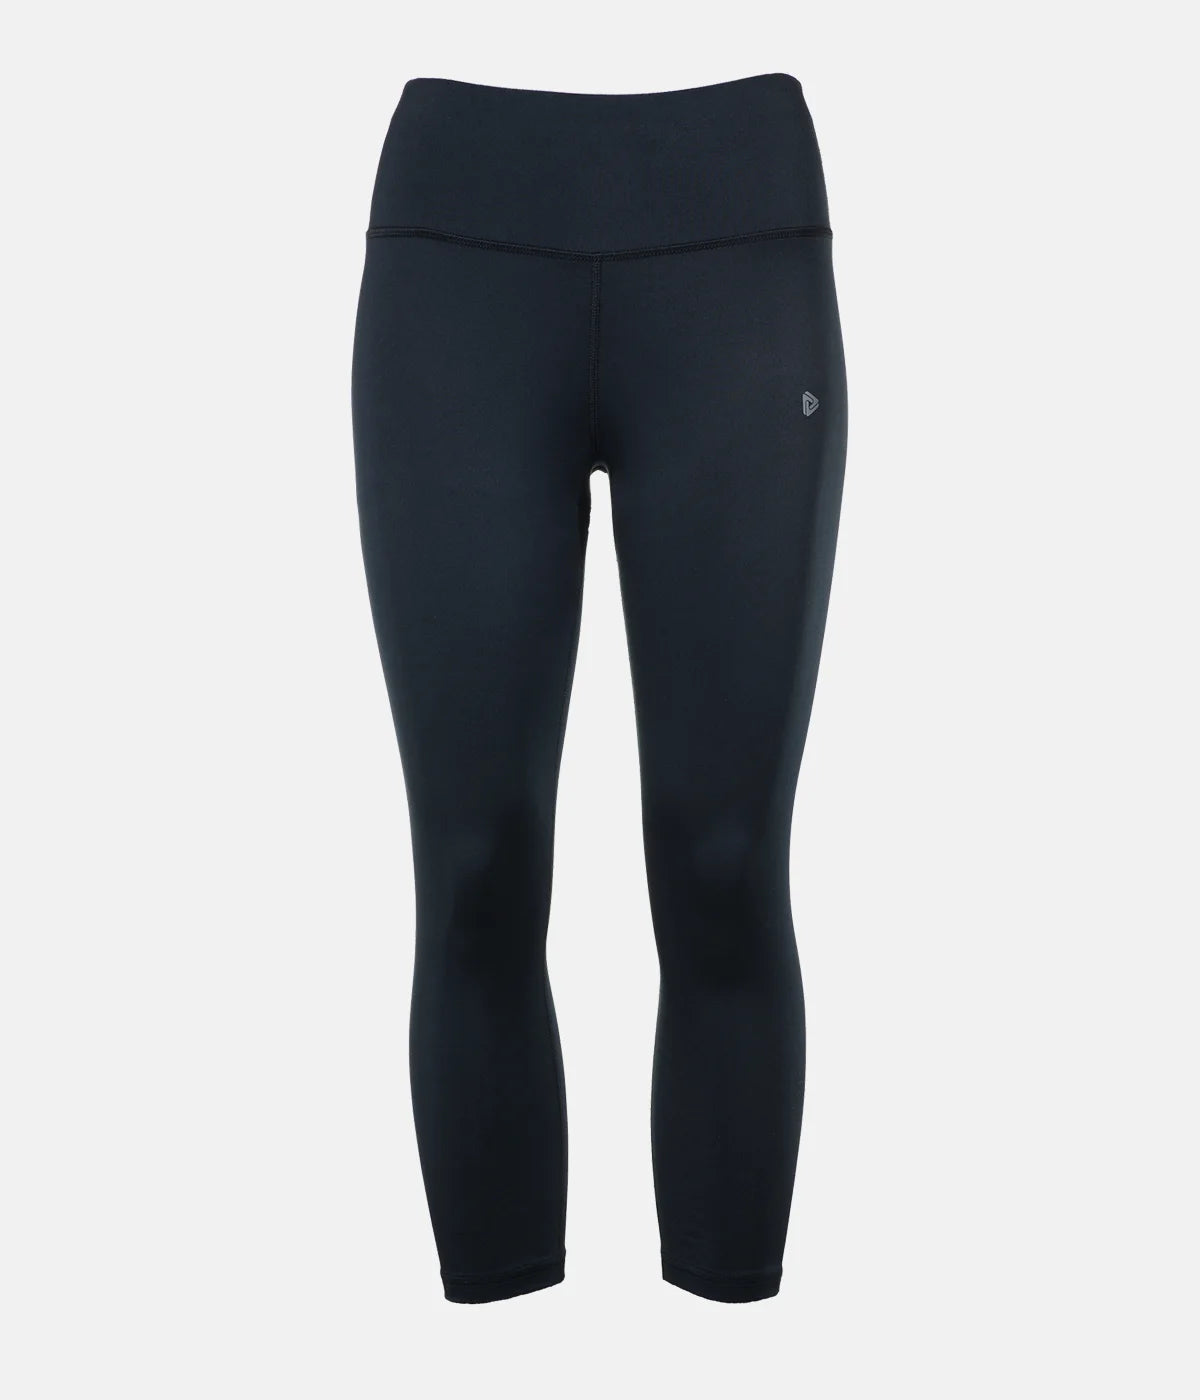 Sample: Women's 3/4 Trail Tights